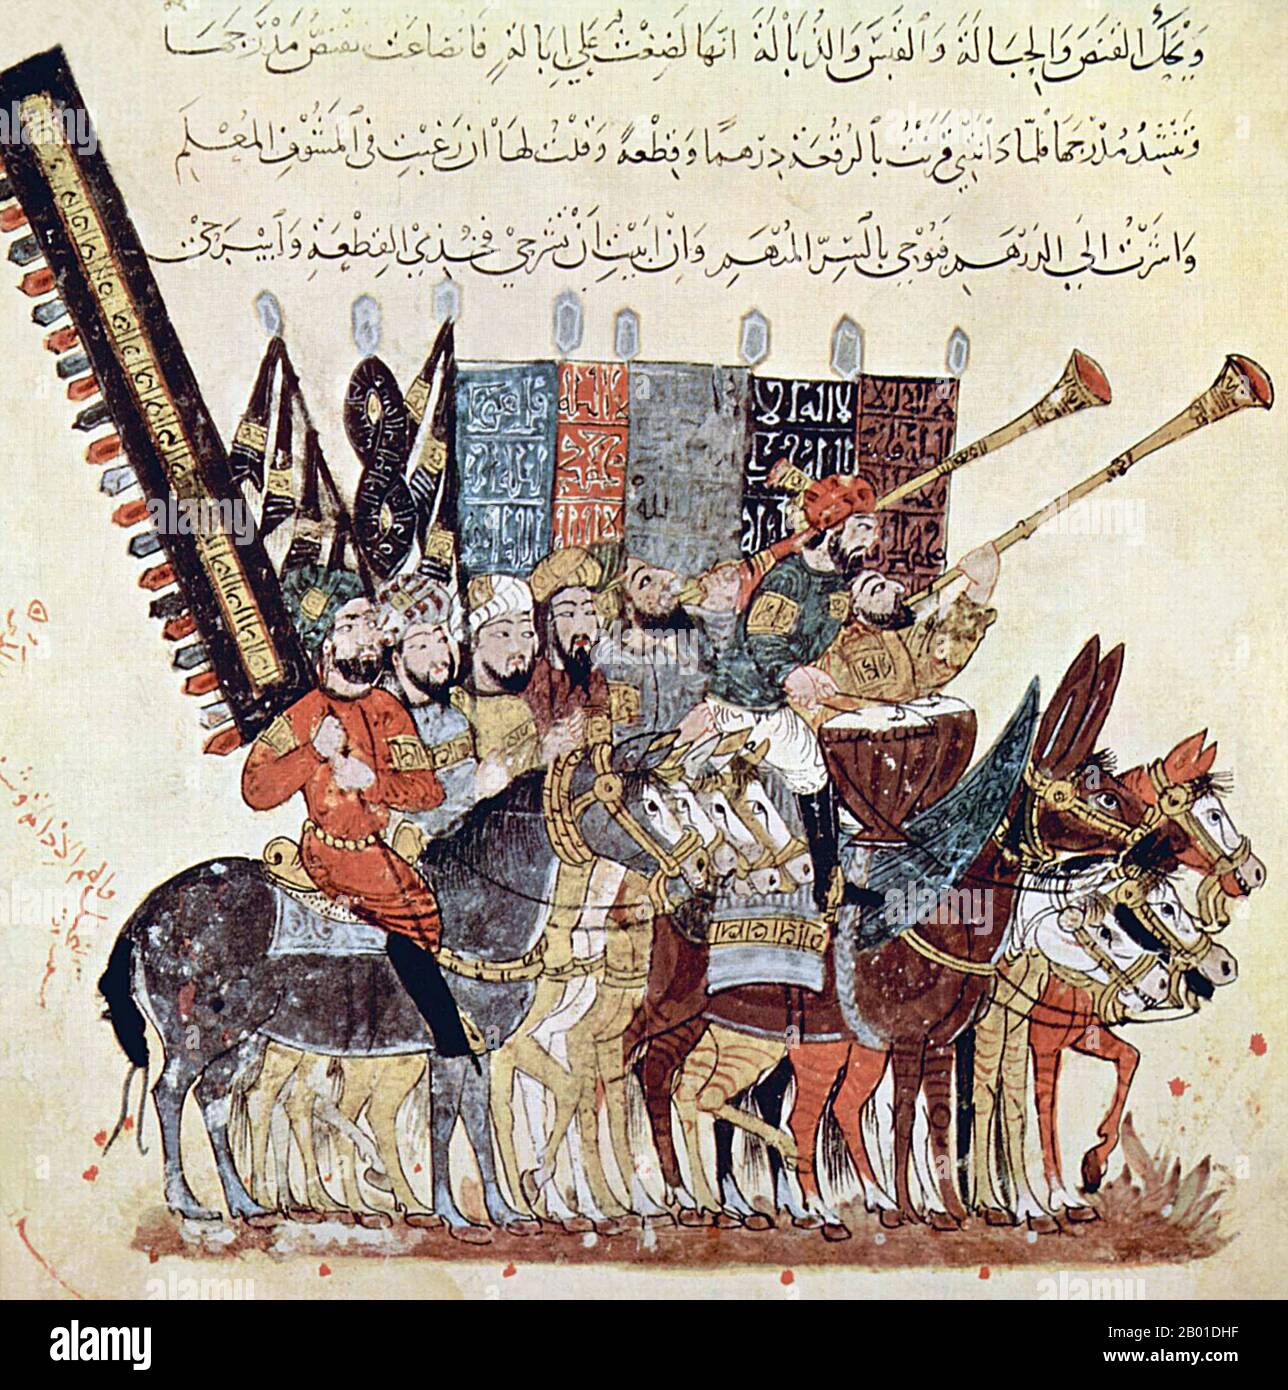 Iraq/Arabia: Announcing the holiday of 'Id al-Fitr marking the end of the Holy Month of Ramadan. Miniature by Yahya ibn Mahmud al-Wasiti (fl. 13th century), 1237 CE.  Yahyâ ibn Mahmûd al-Wâsitî was a 13th century Arab Islamic artist. Al-Wasiti was born in Wasit in southern Iraq. He was noted for his illustrations of the Maqam of al-Hariri.  Maqāma (literally 'assemblies') are an (originally) Arabic literary genre of rhymed prose with intervals of poetry in which rhetorical extravagance is conspicuous. The 10th century author Badī' al-Zaman al-Hamadhāni is said to have invented the form. Stock Photo